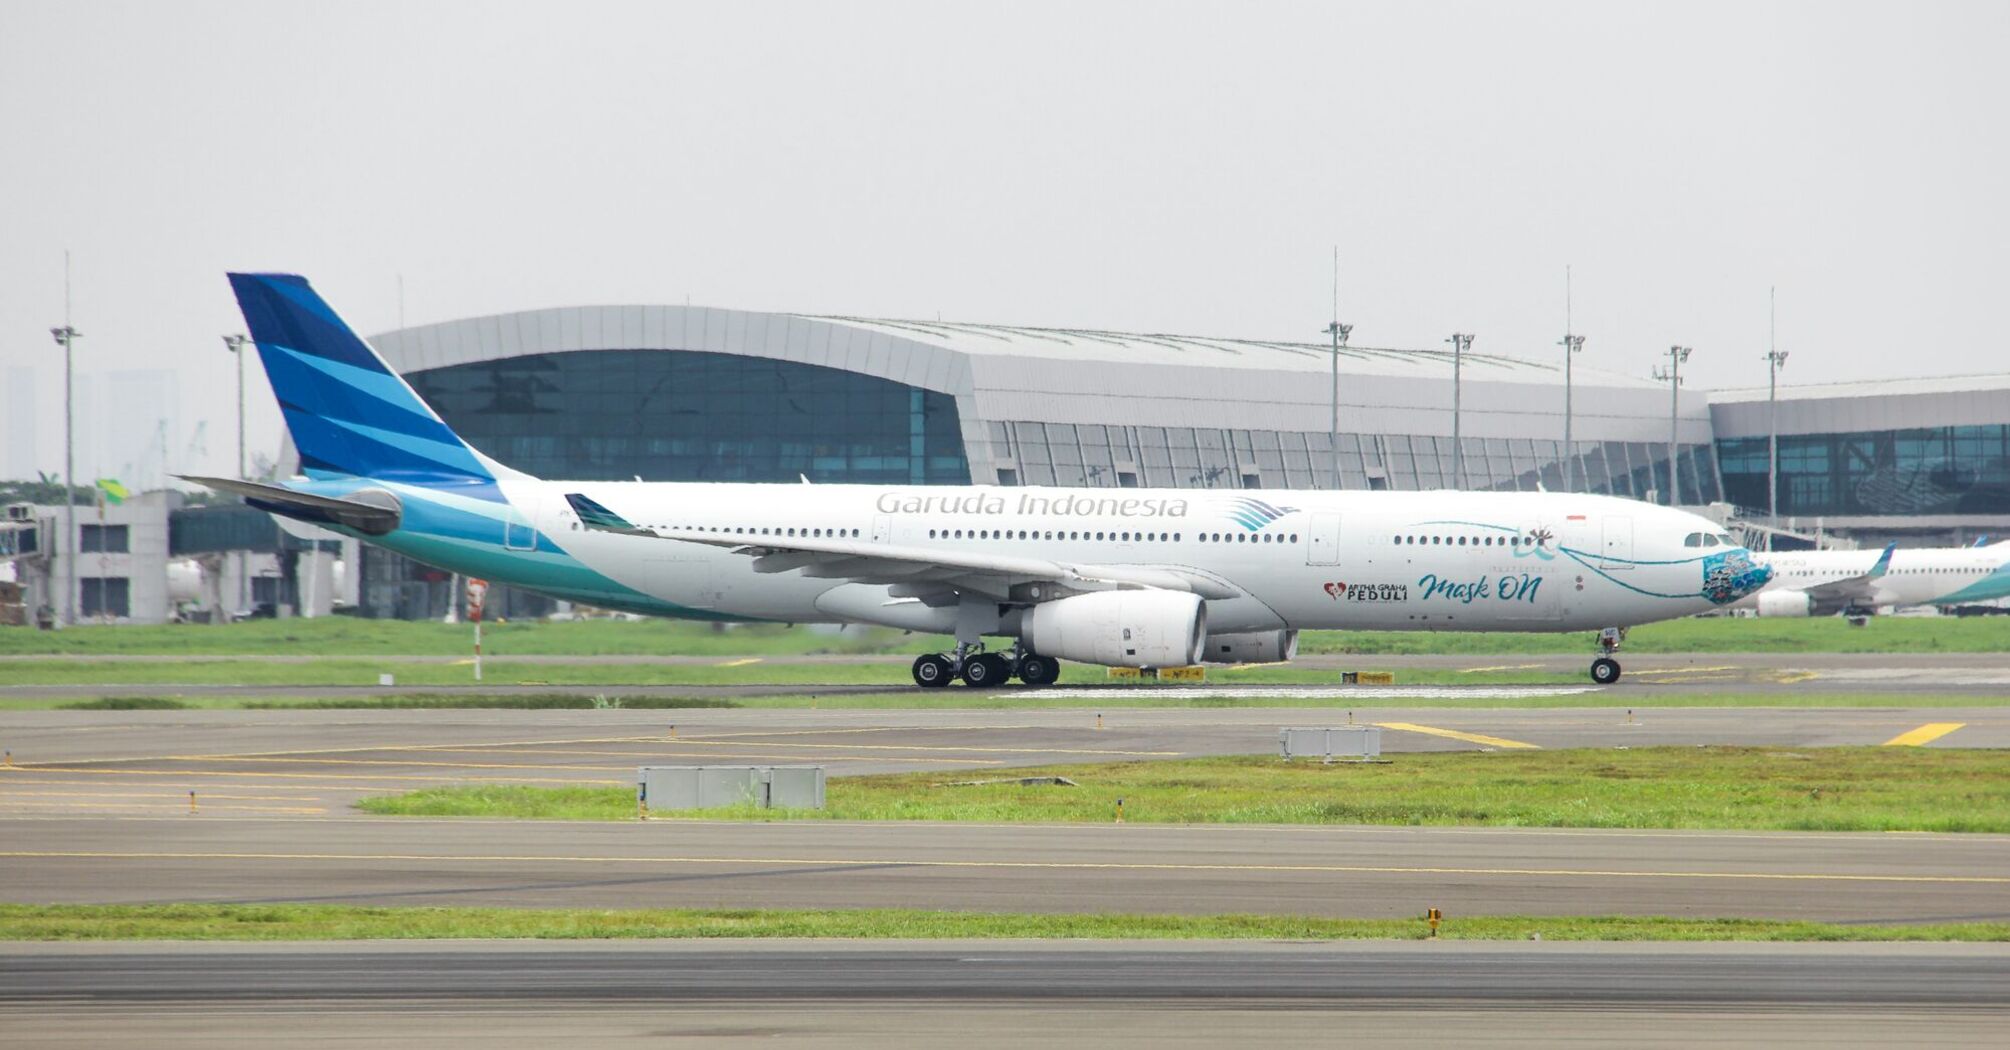 A large Garuda Indonesia passenger jet sitting on top of an airport runway